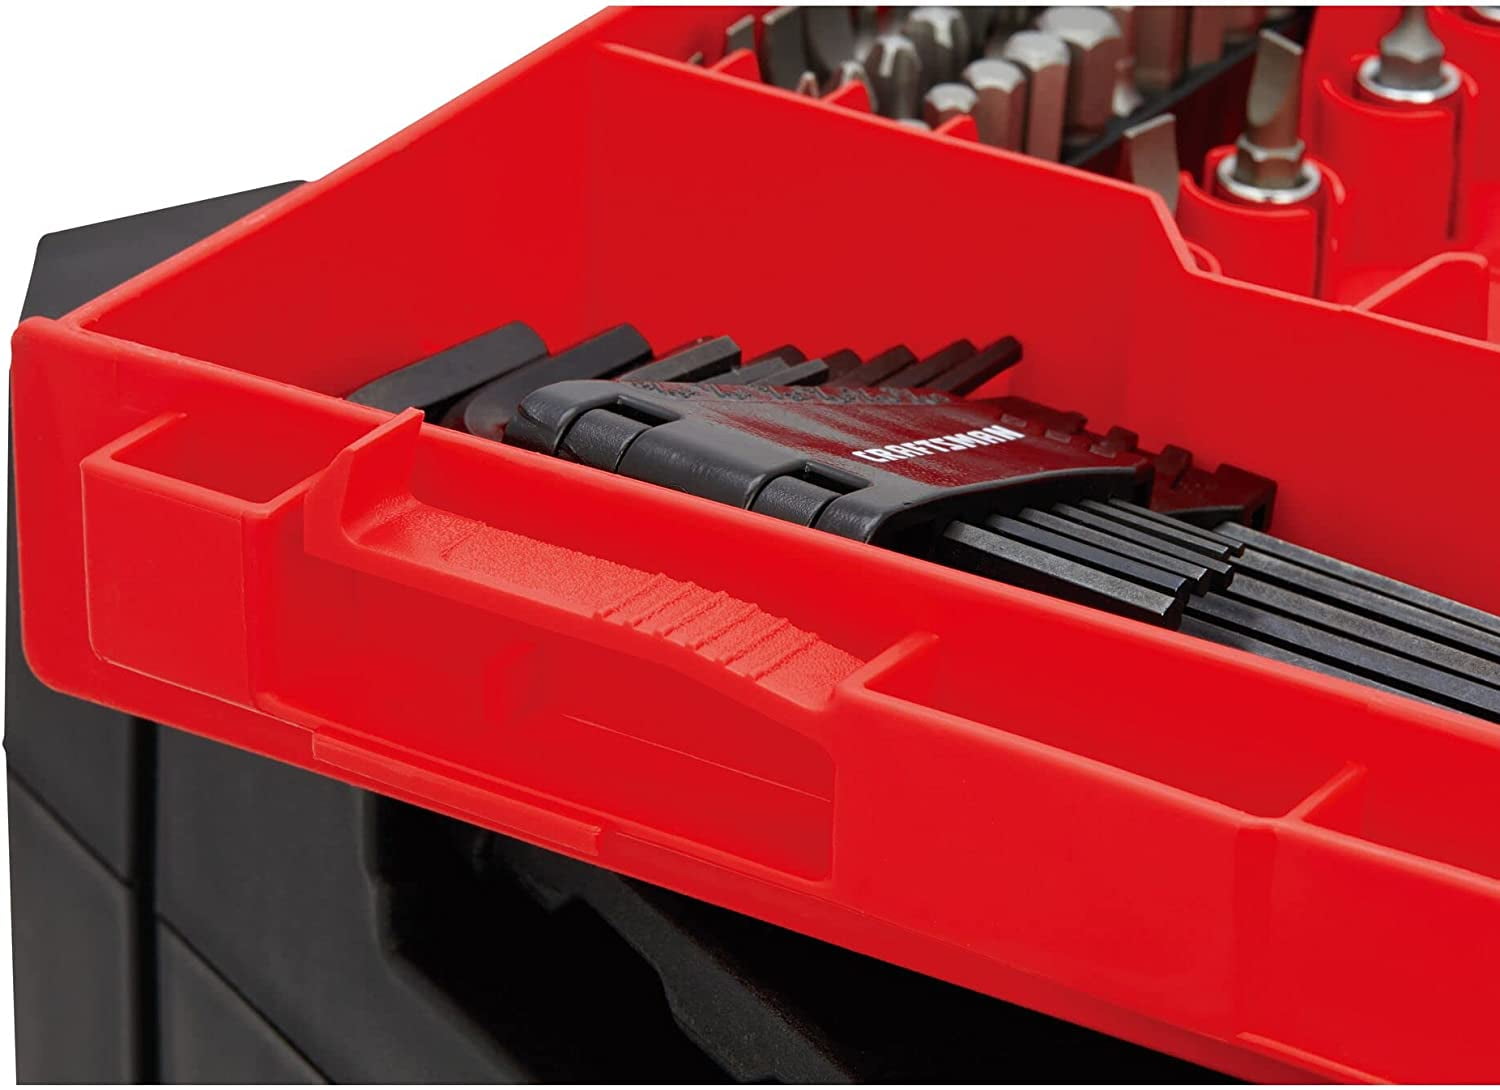 Craftsman Mechanic Tool Set, 230 Piece with Drawers, Sockets, Extension  Bars, Wrenches, Hex Keys, and More (CMMT45305)